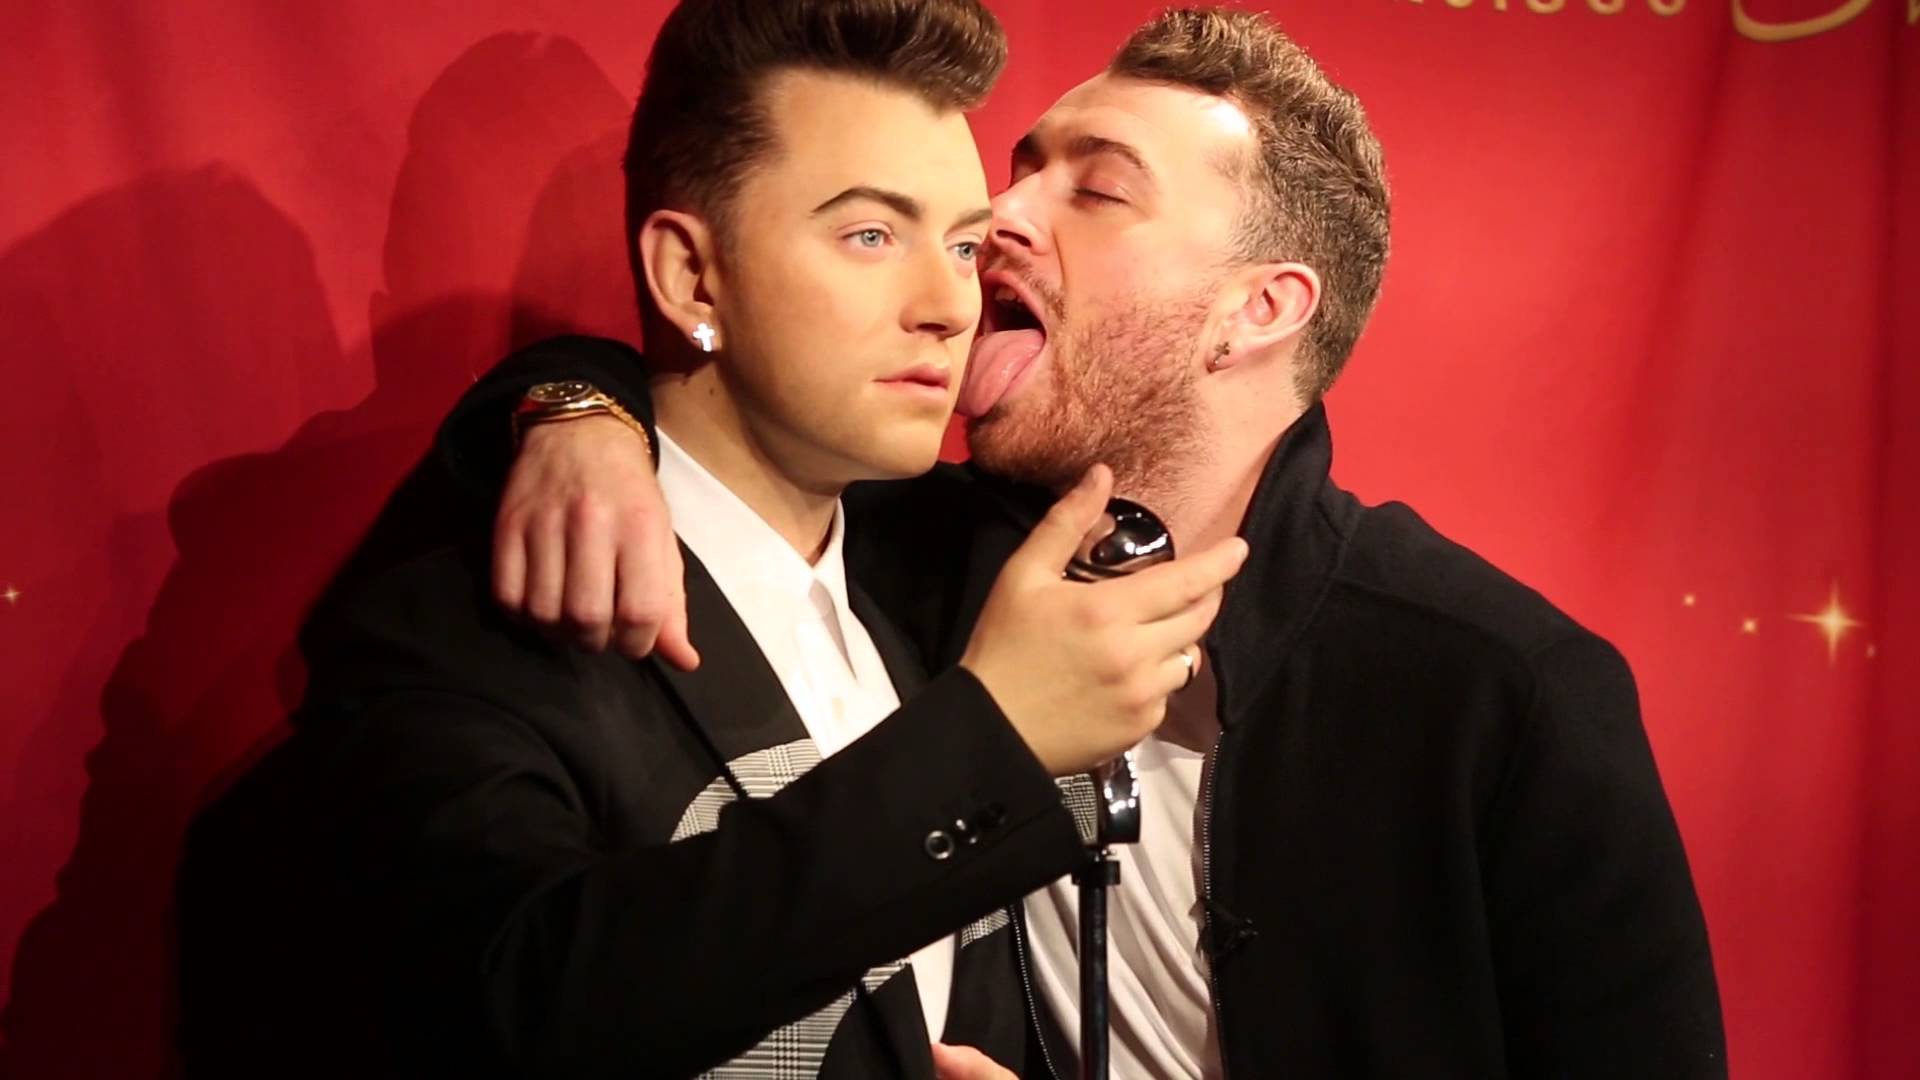 Sam Smith meets his wax figure for the first time - YouTube